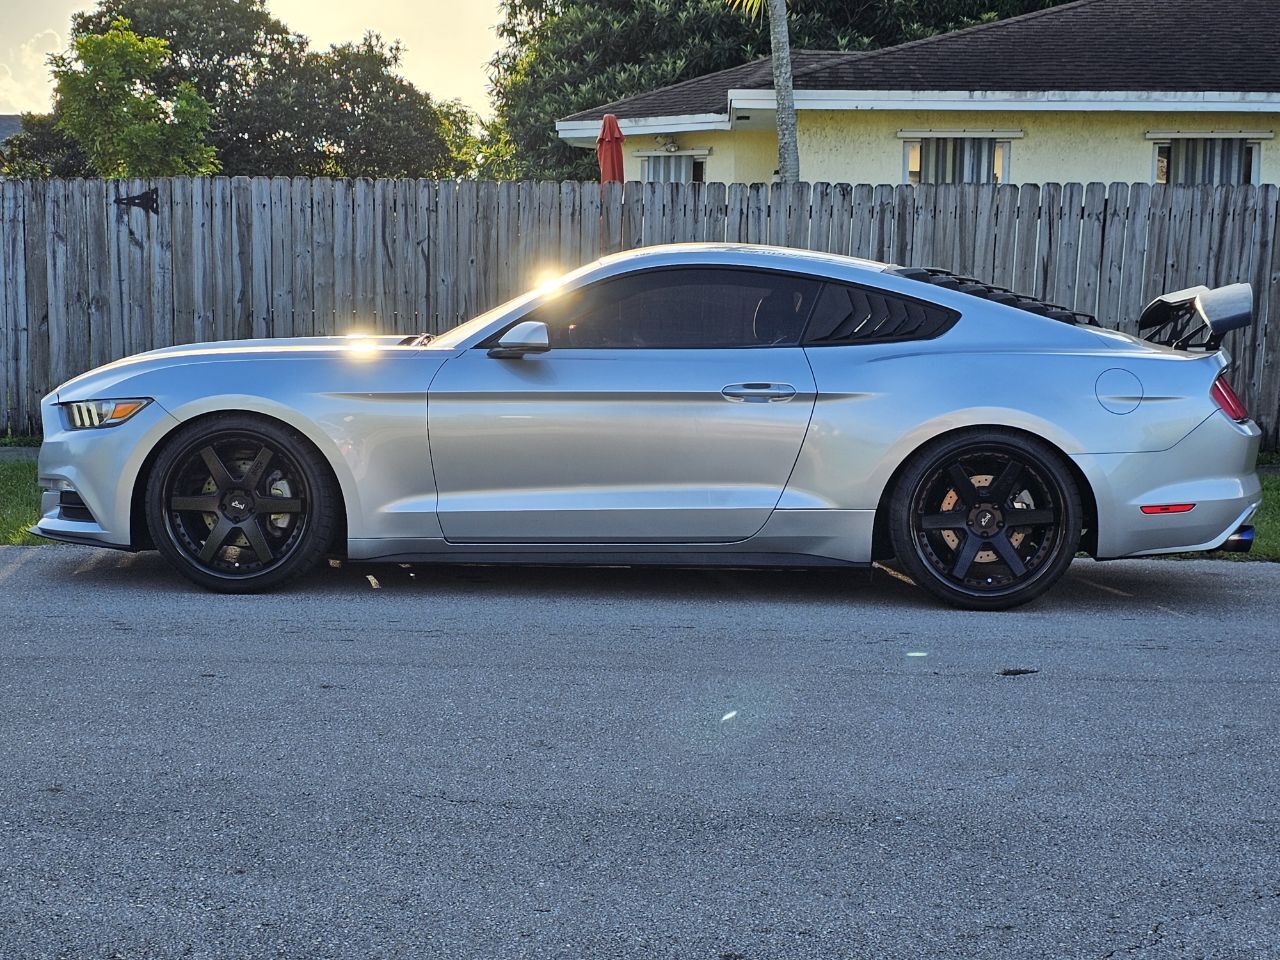 2017 FORD Mustang Coupe - $17,105